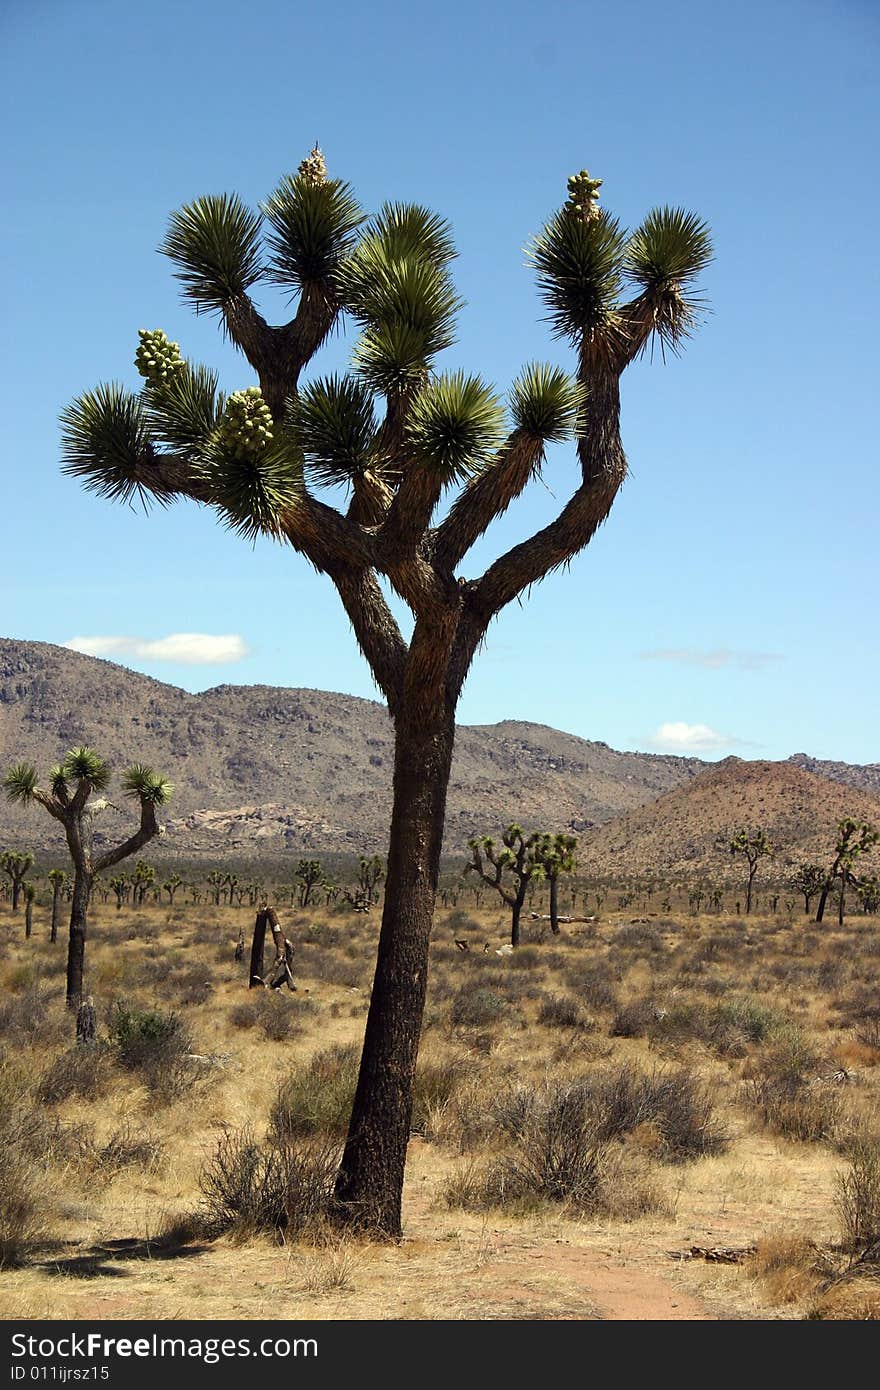 A view of Joshua Tree National Park with a Joshua tree in the foreground